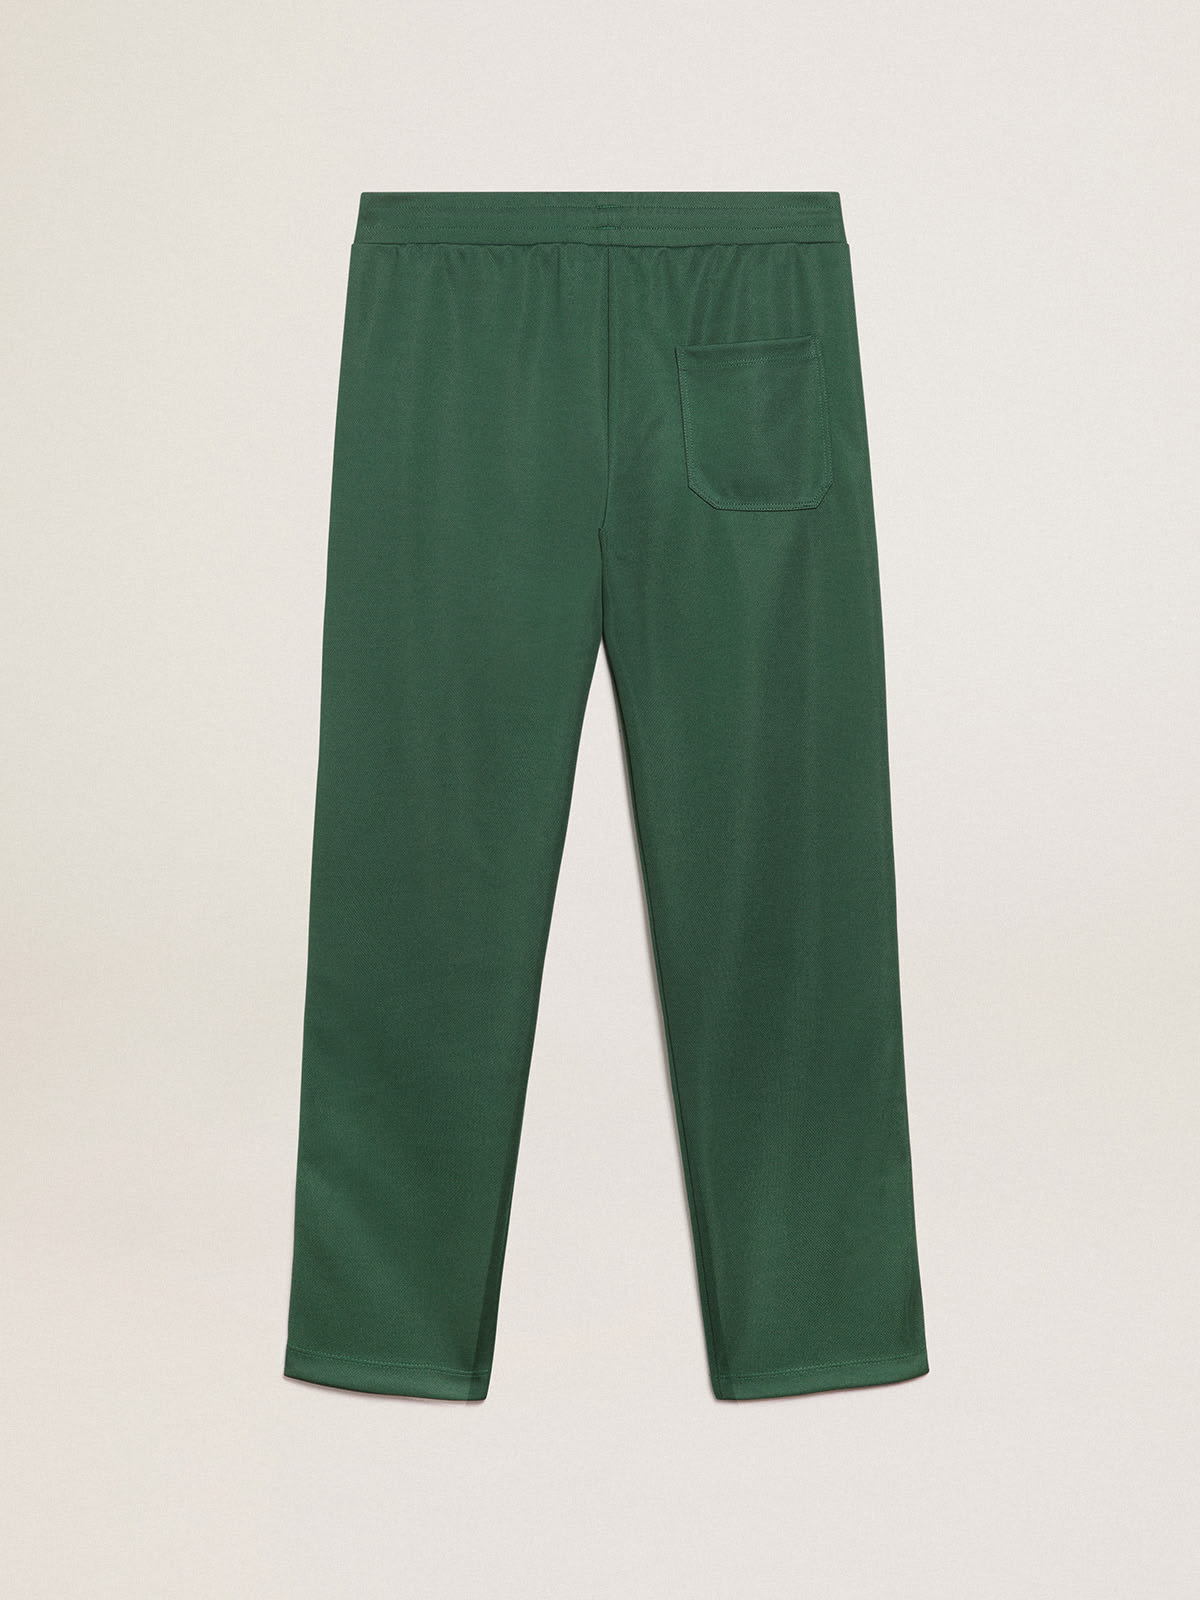 Golden Goose - Men’s green joggers with stars on the sides  in 